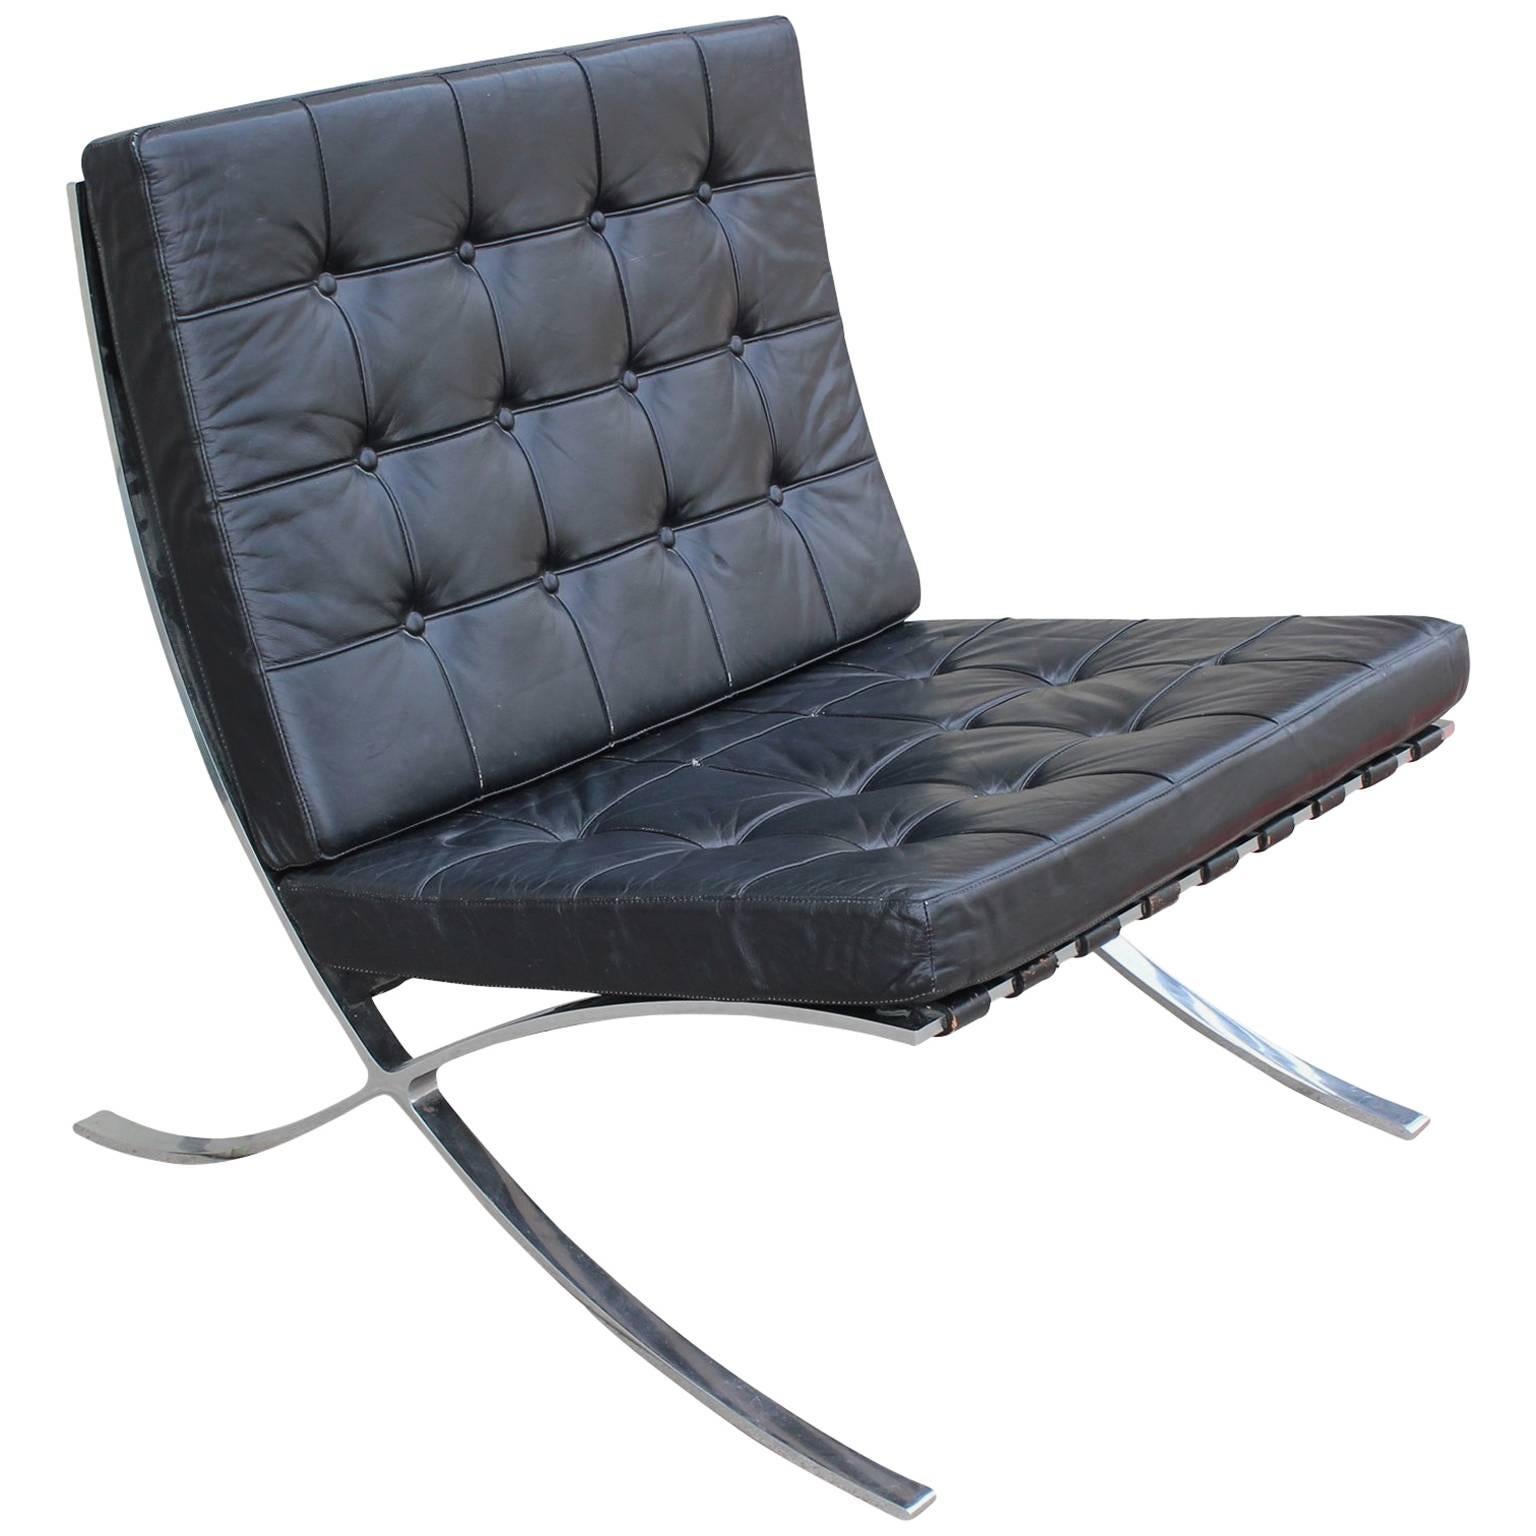 Knoll Inspired Modern Barcelona Chair in Black Leather and Chrome